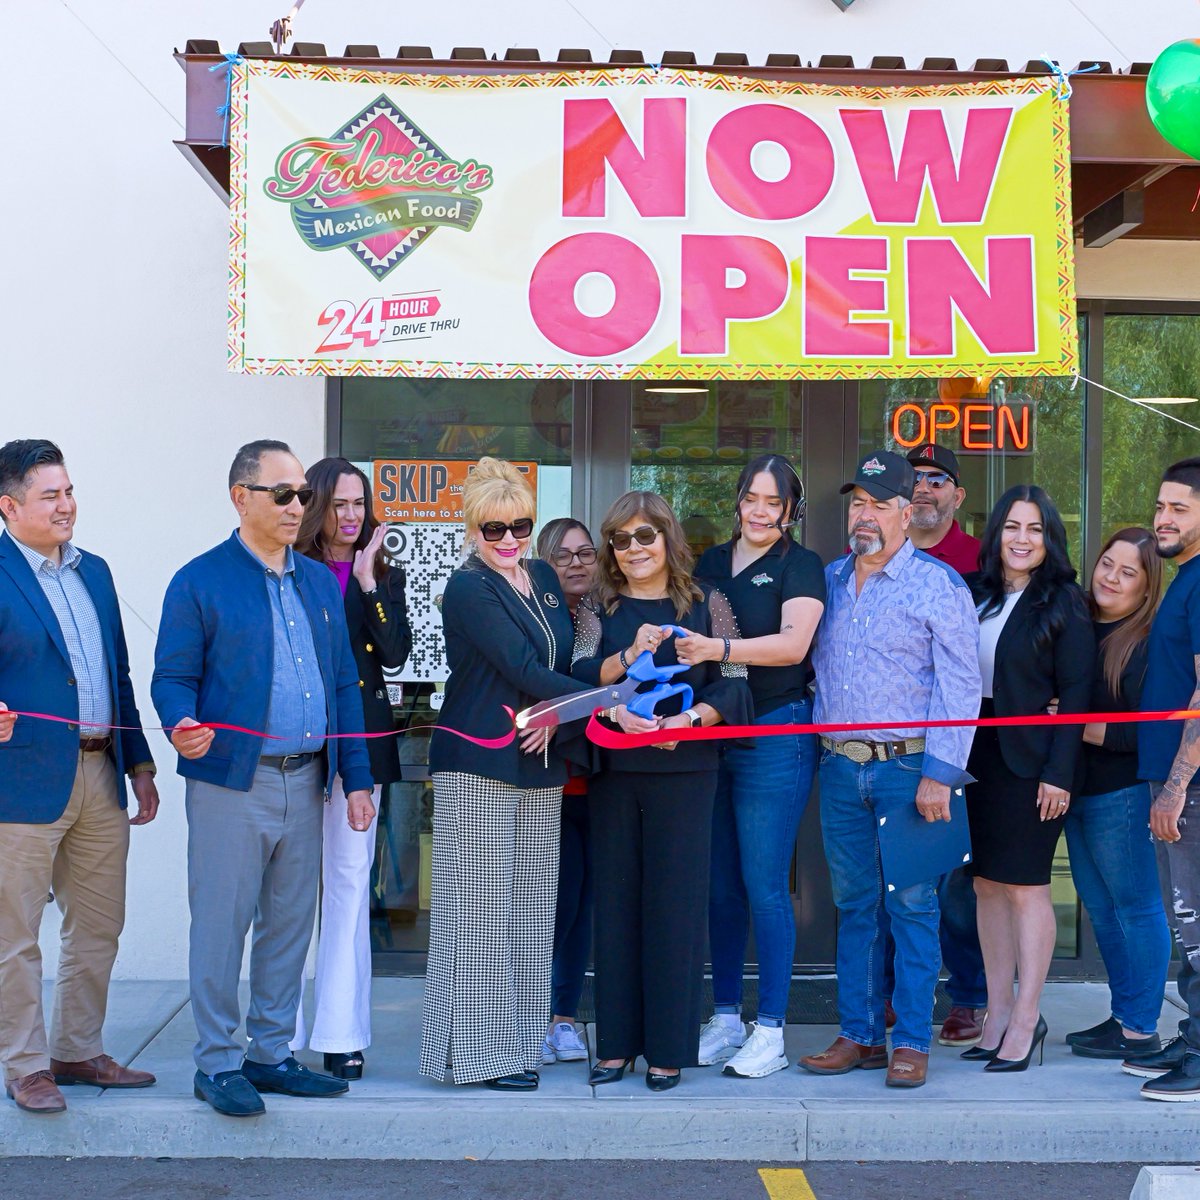 We love seeing our clients' businesses thrive! For more than 20 years, Federico Restaurants has been serving authentic Mexican food around the clock in Arizona and New Mexico. We are excited to support them as they expand their services by opening SIX new locations.